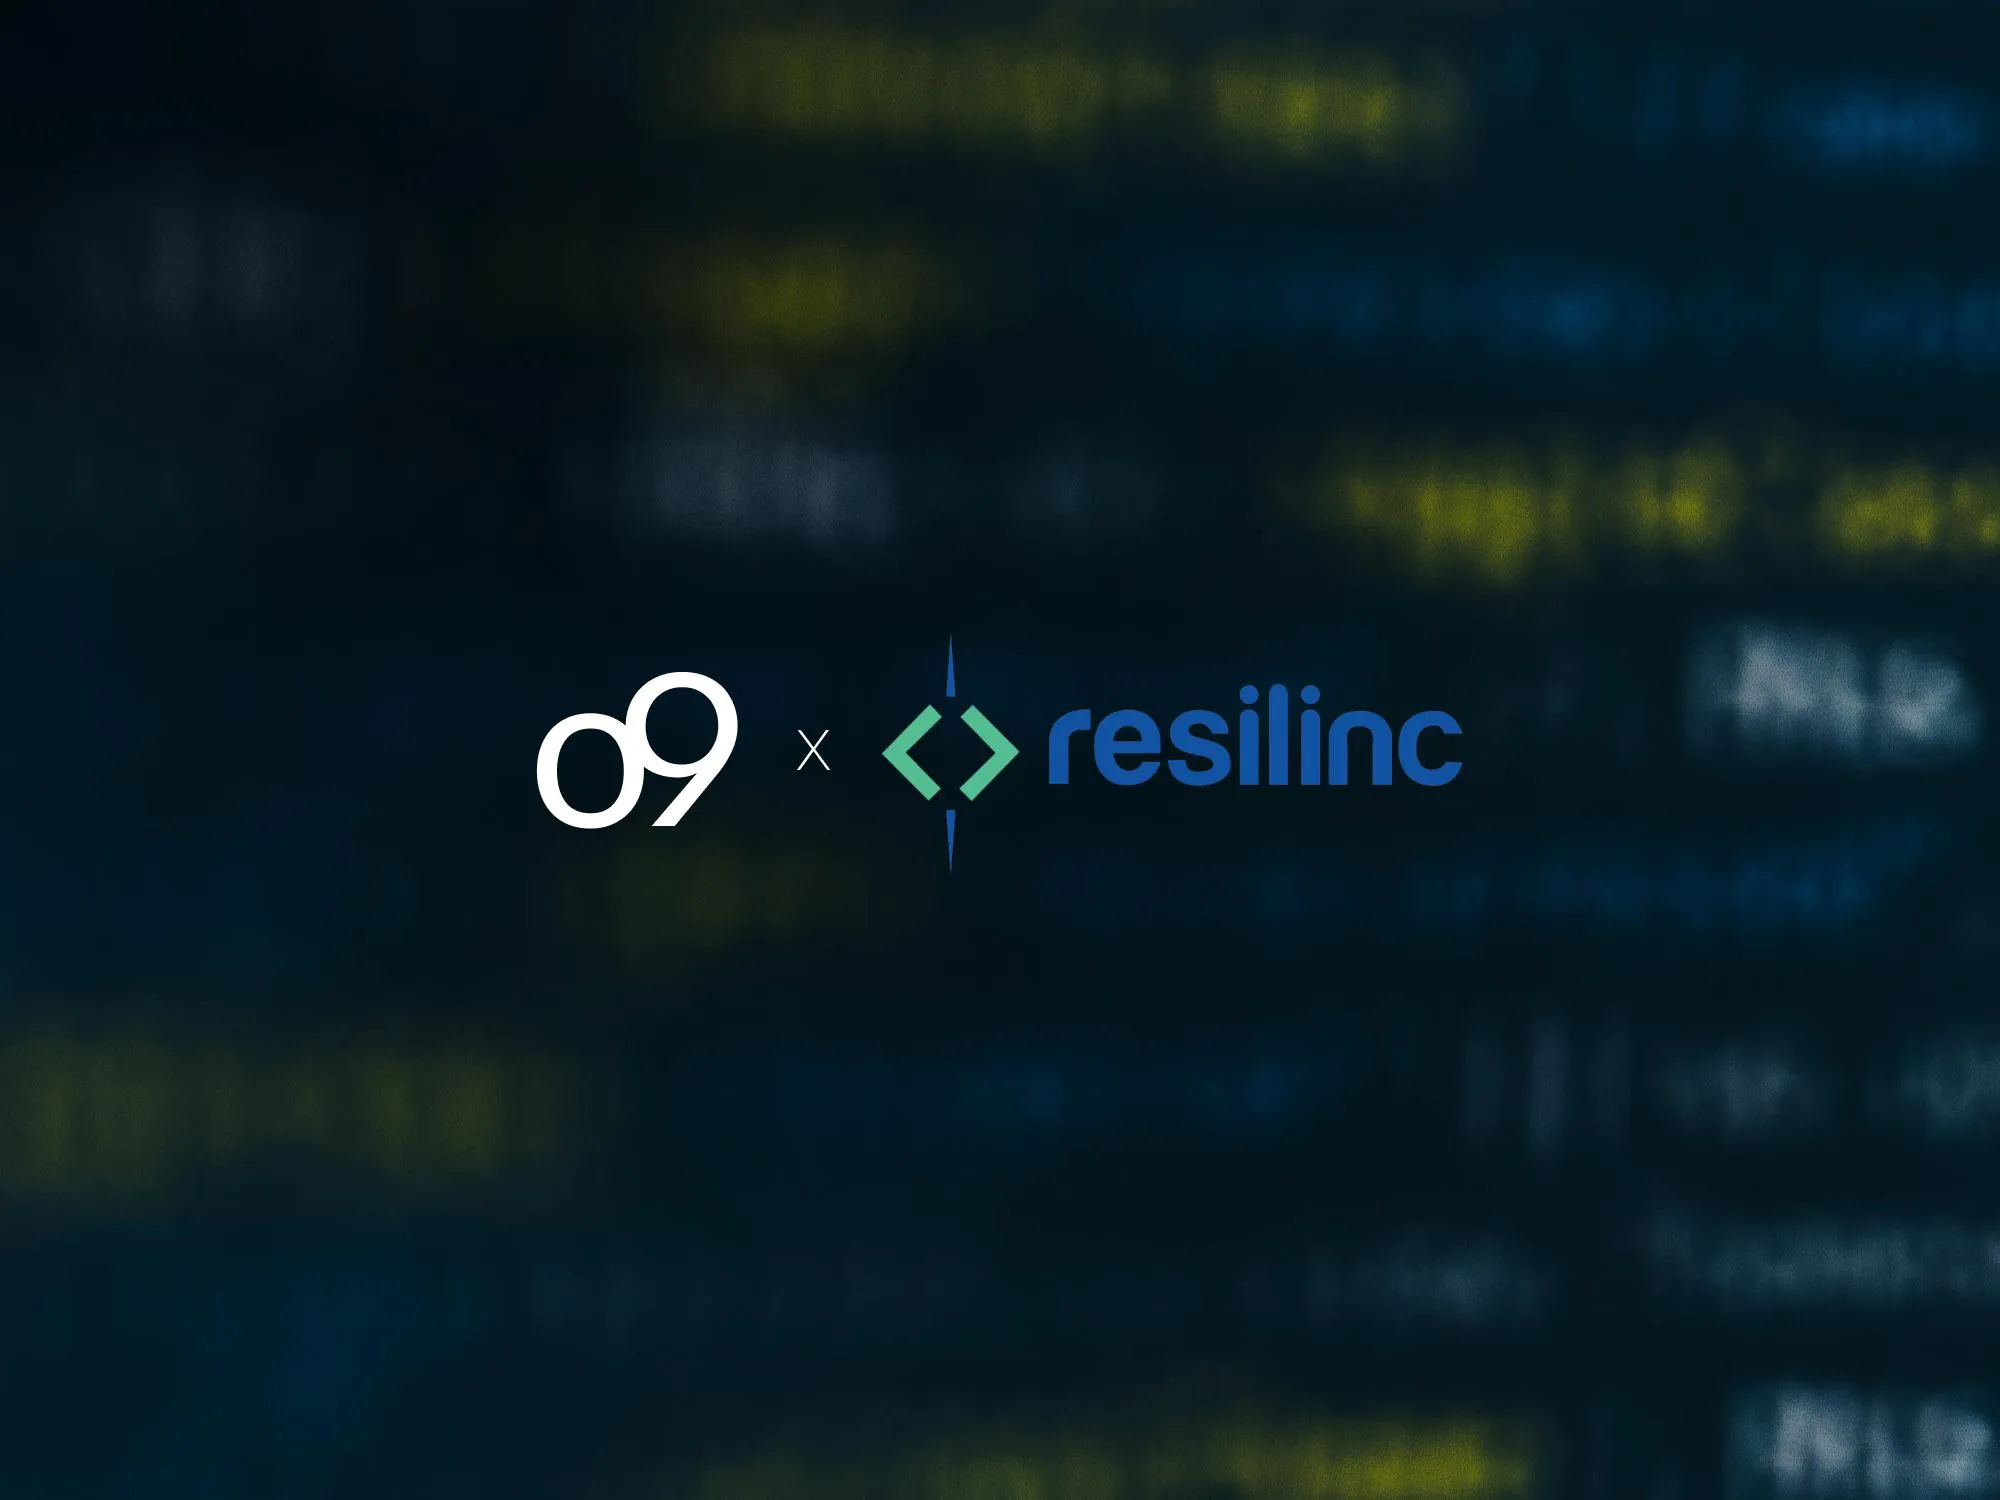 o9 and Resilinc Partner to Provide Joint Clients With Greater Visibility Into Their Multi-Tier Supply Network